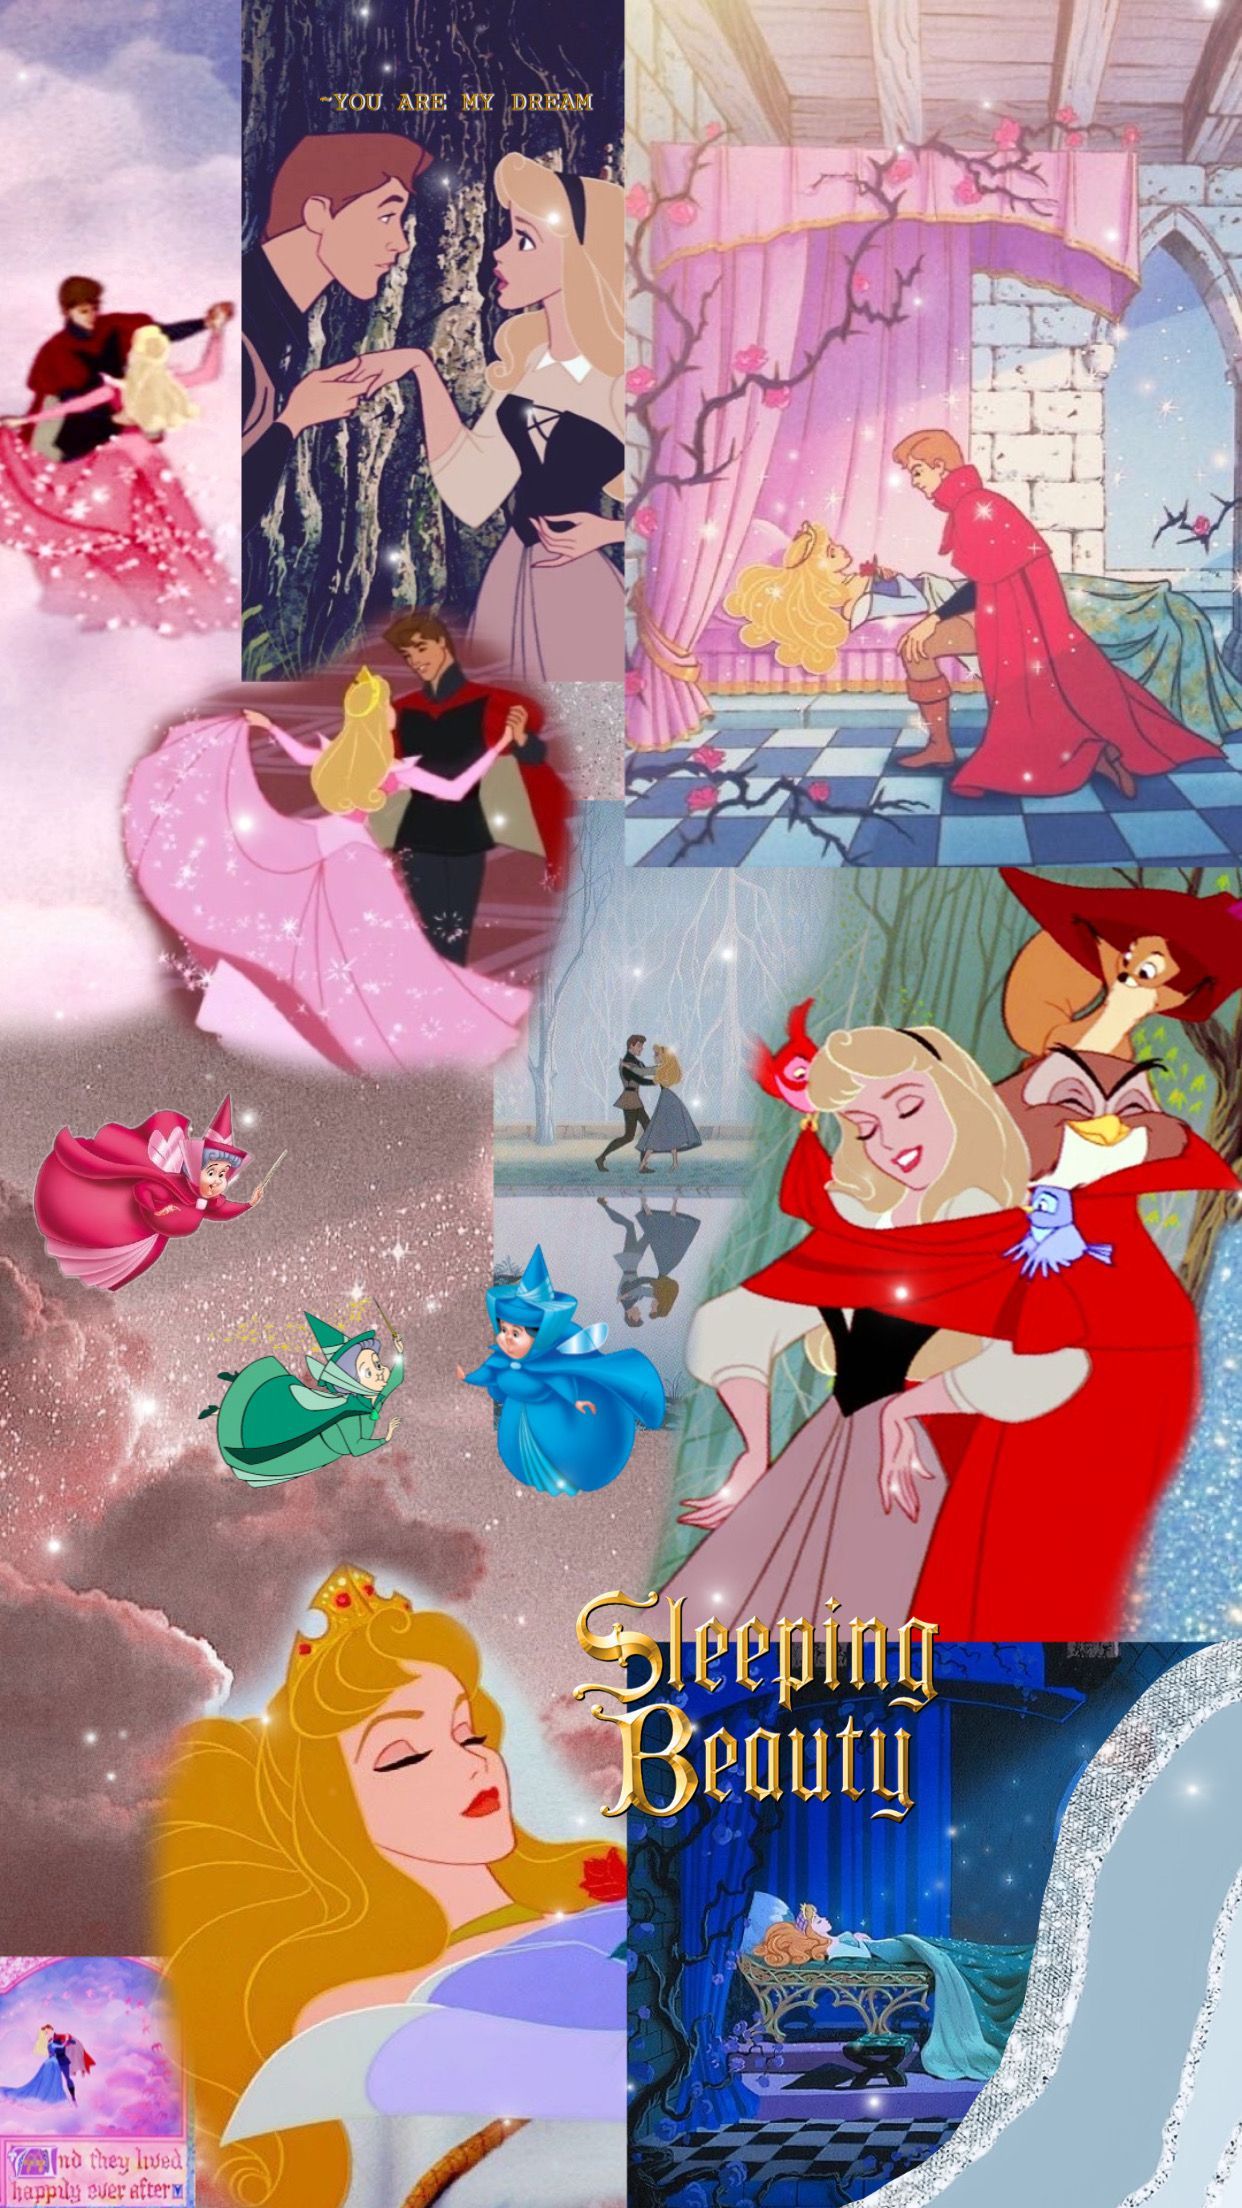 10 Sleeping Beauty 1959 HD Wallpapers and Backgrounds